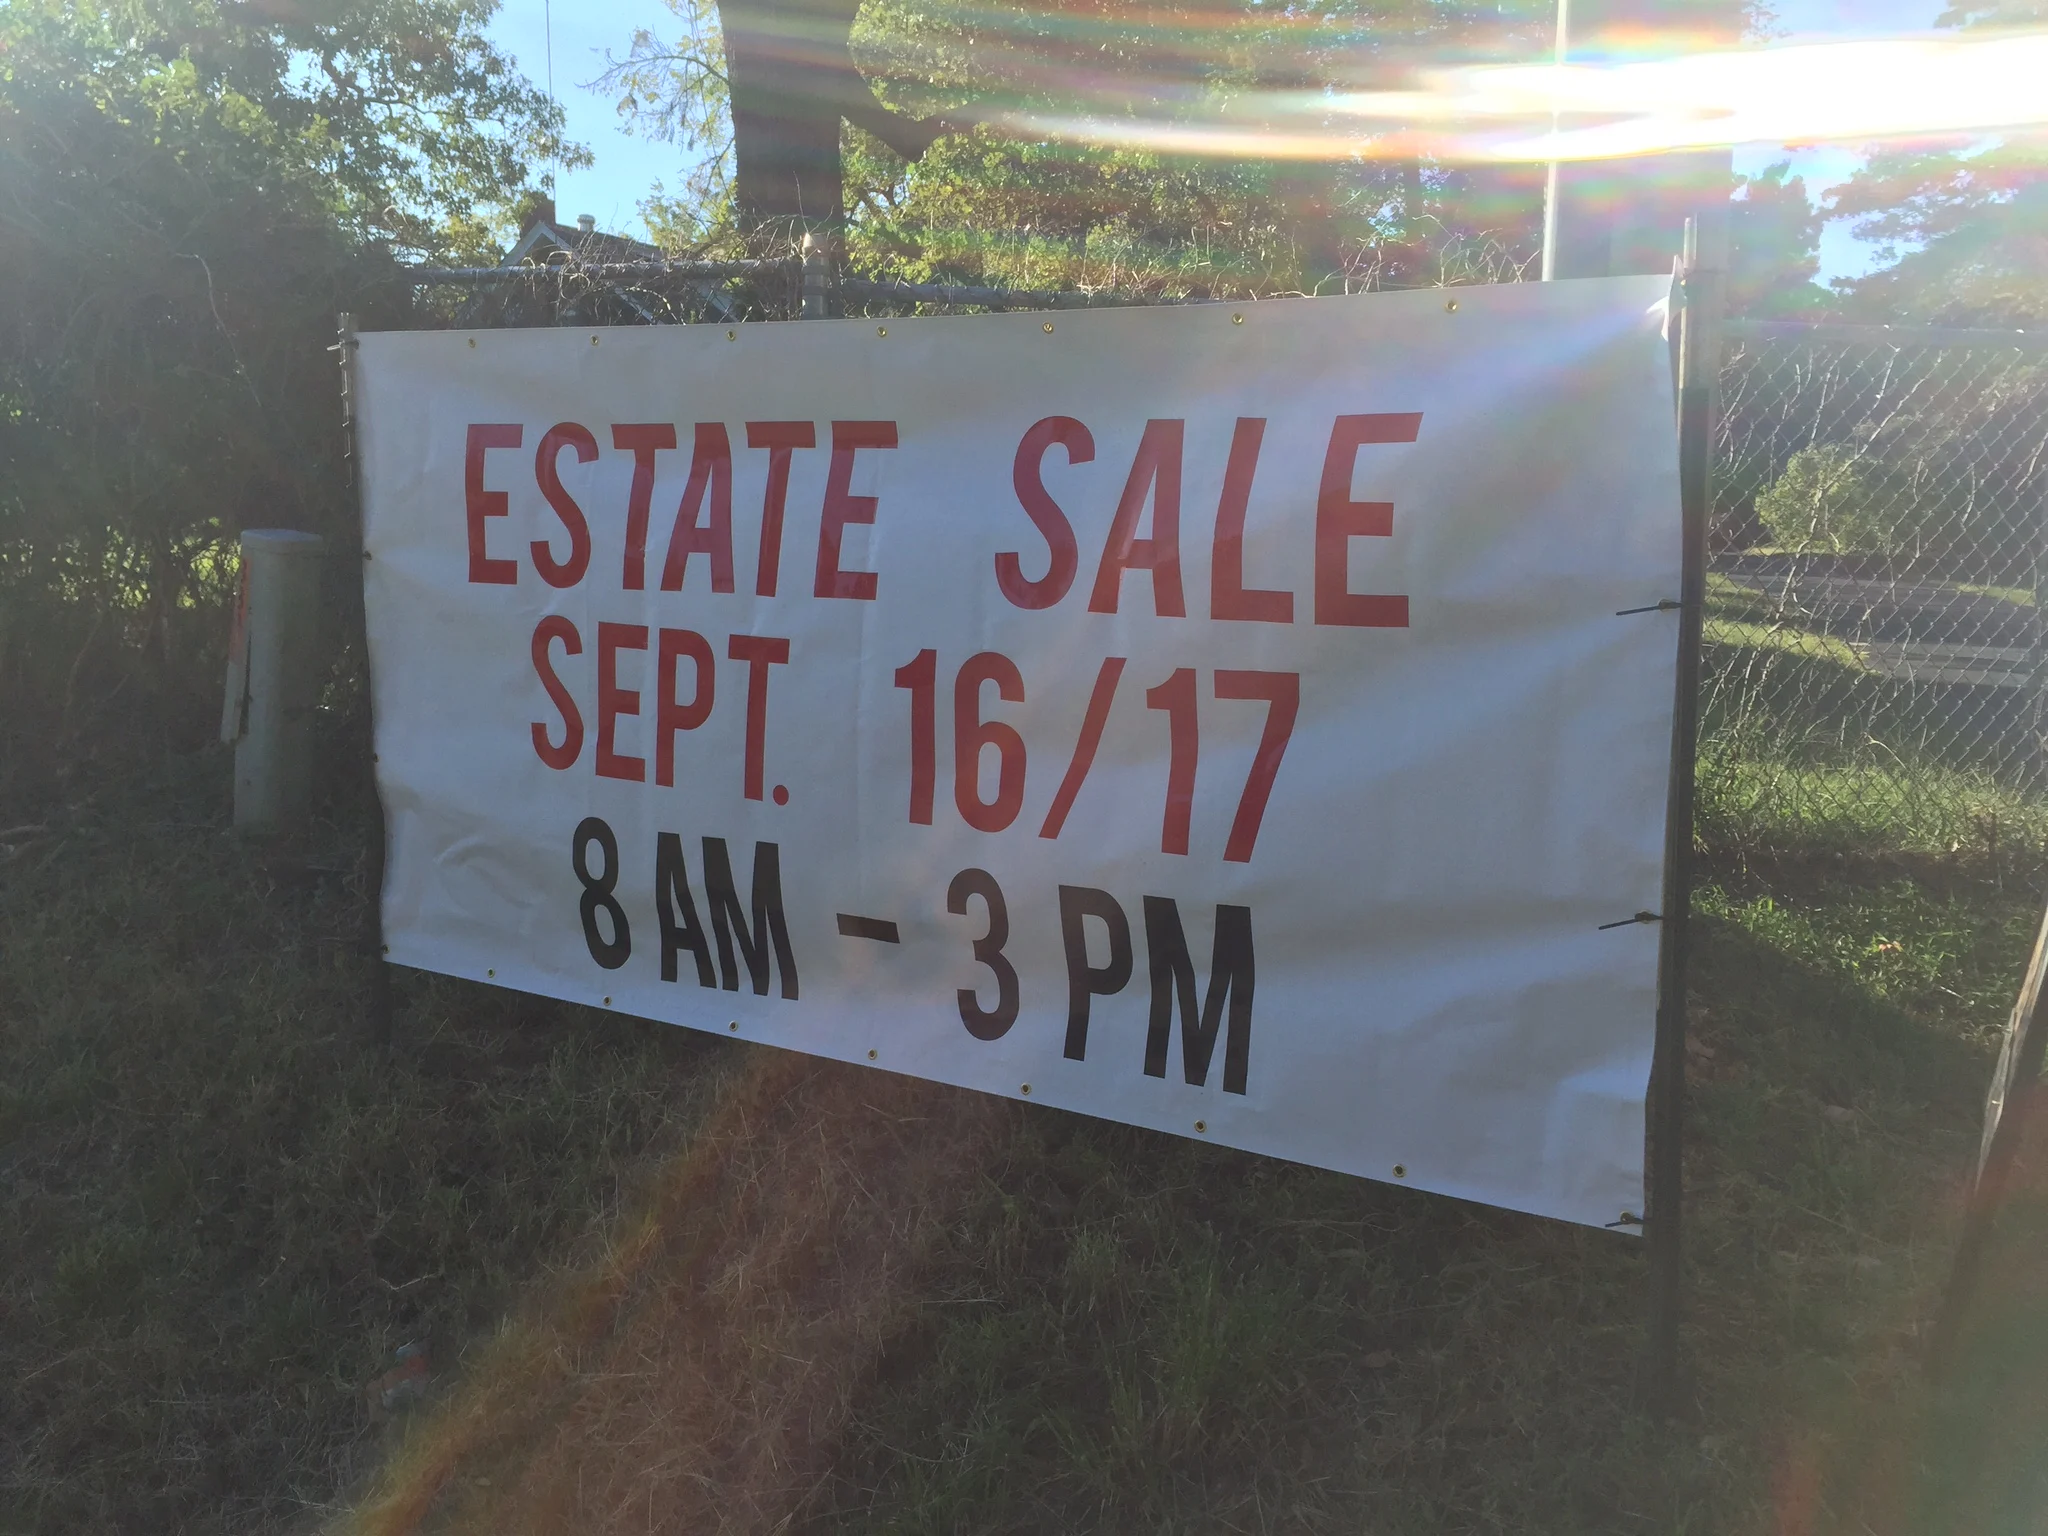 A sign advertising an estate sale